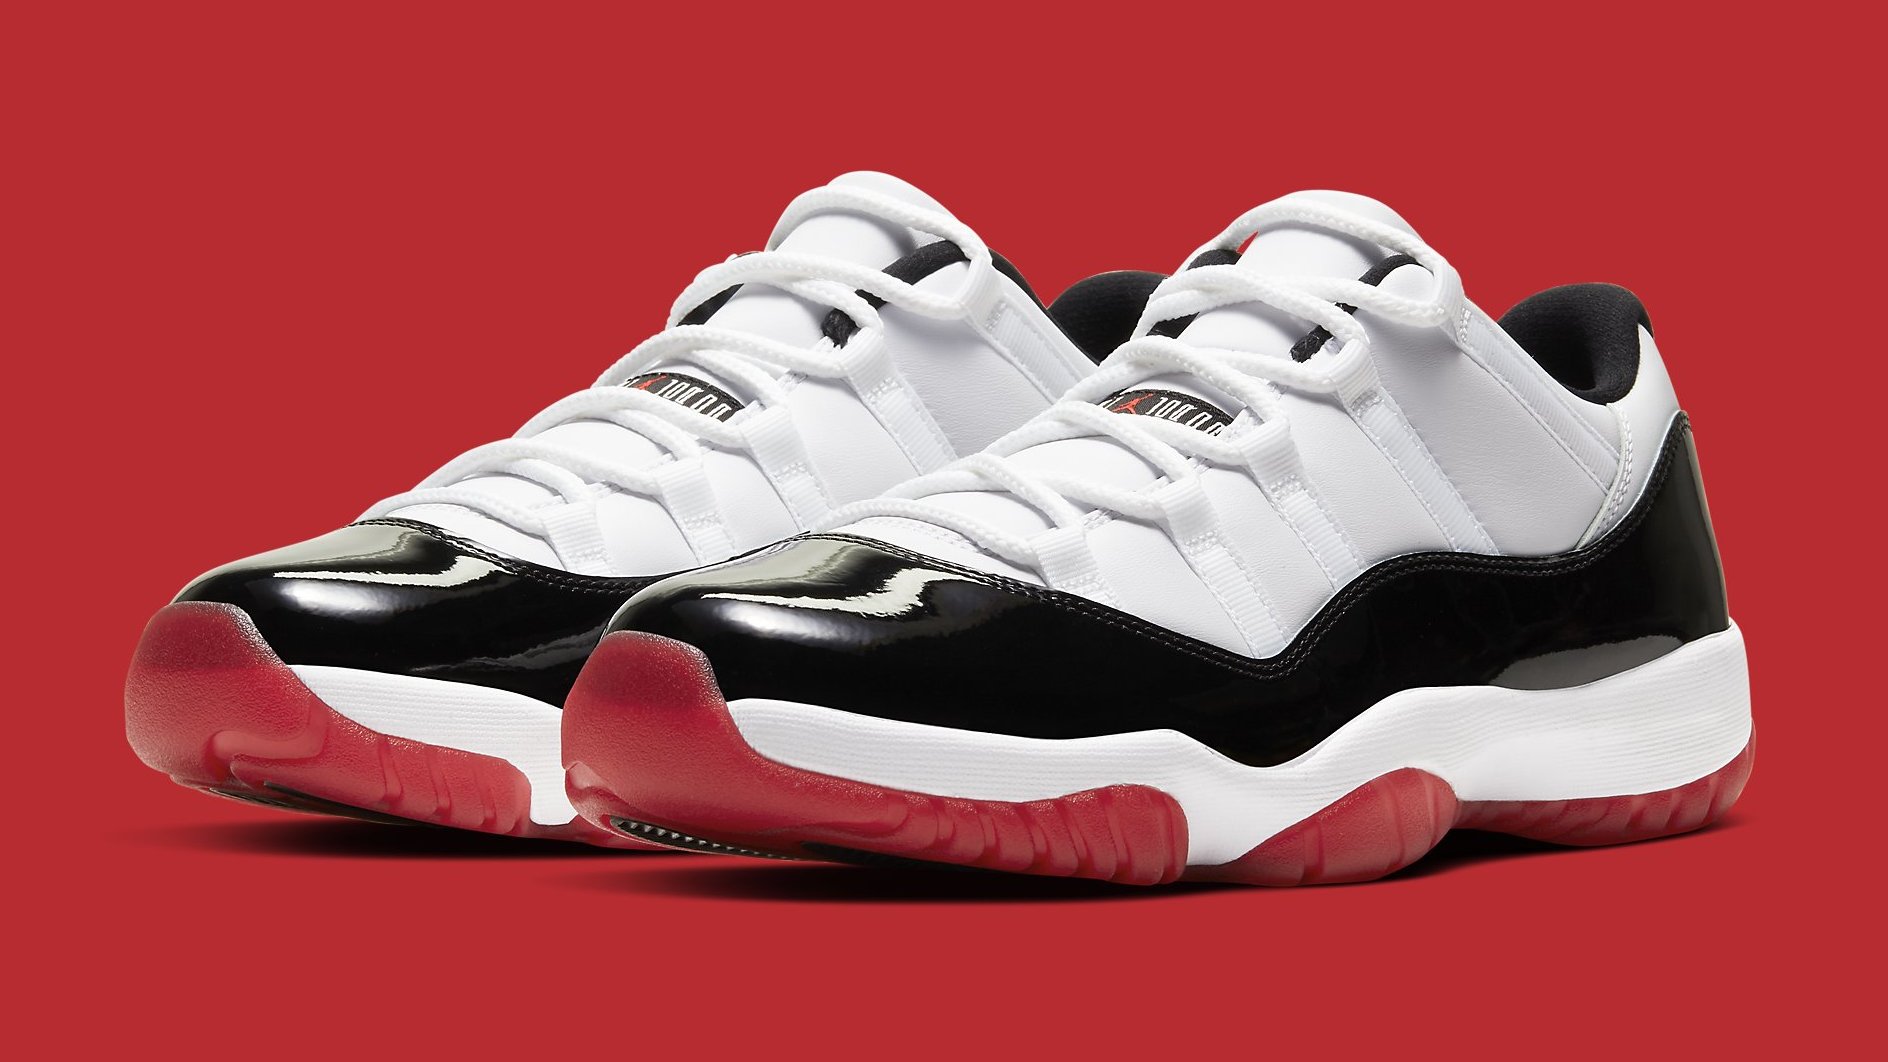 This Air Jordan 11 Low Combines Two OG Colorways | Complex